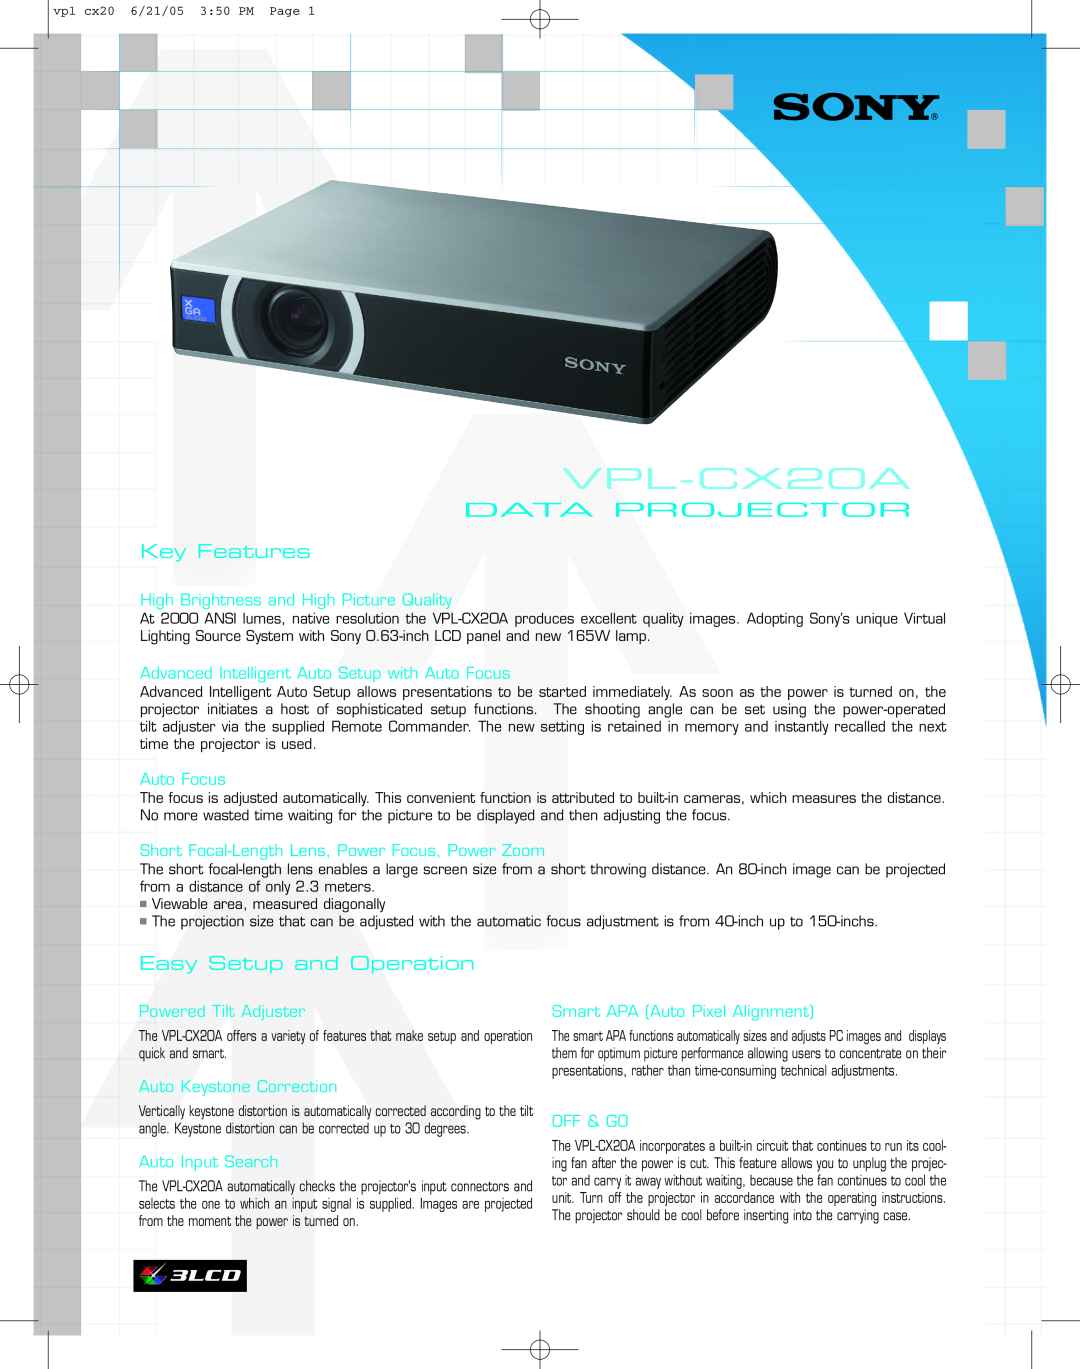 Sony VPL-CX20A manual DATA PROJECTOR Key Features, Easy Setup and Operation, High Brightness and High Picture Quality 